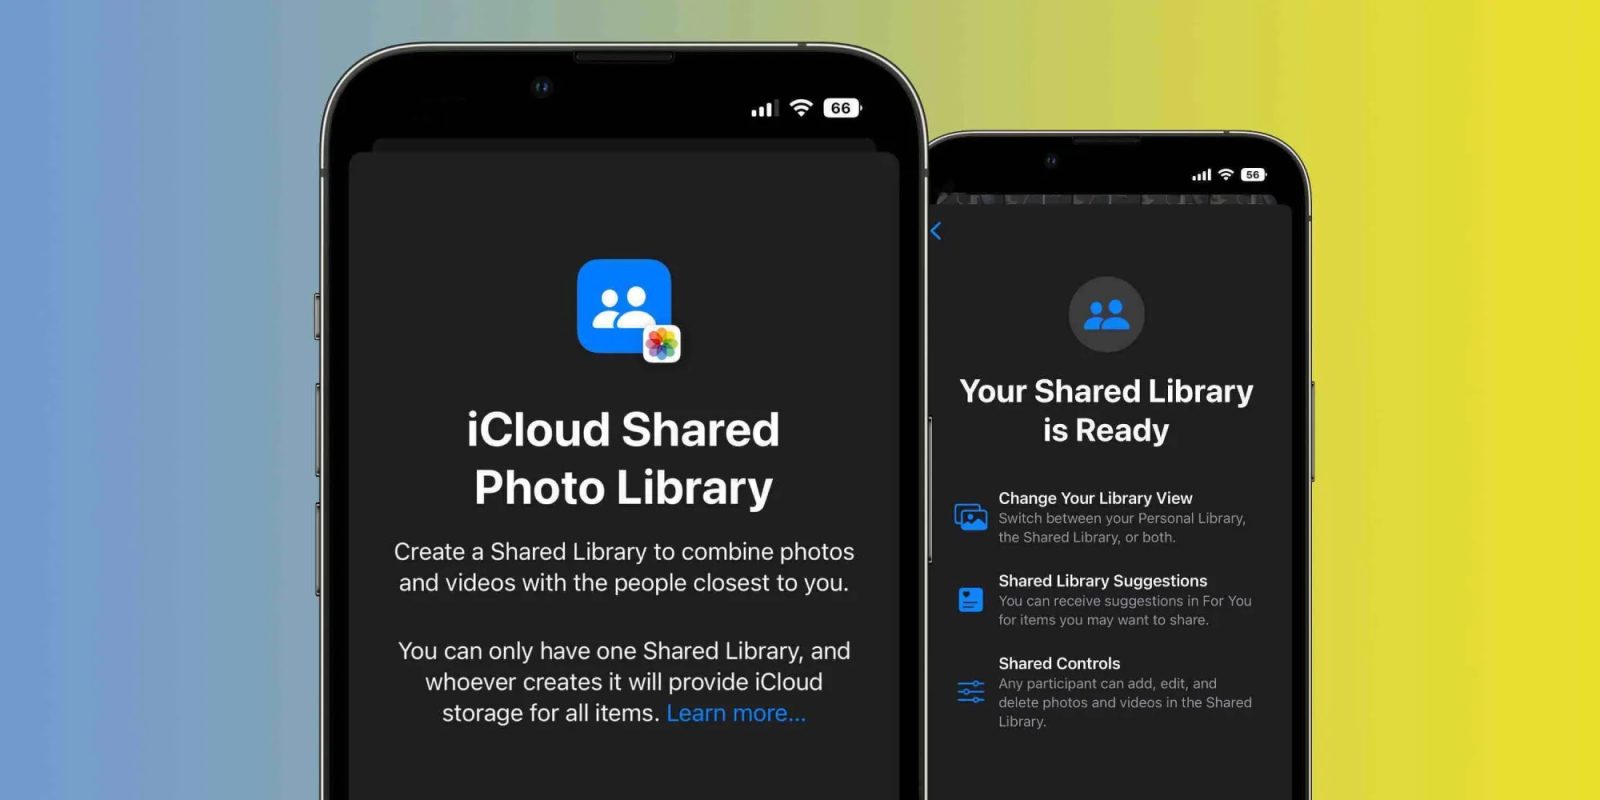 iCloud Share Photo Library not working